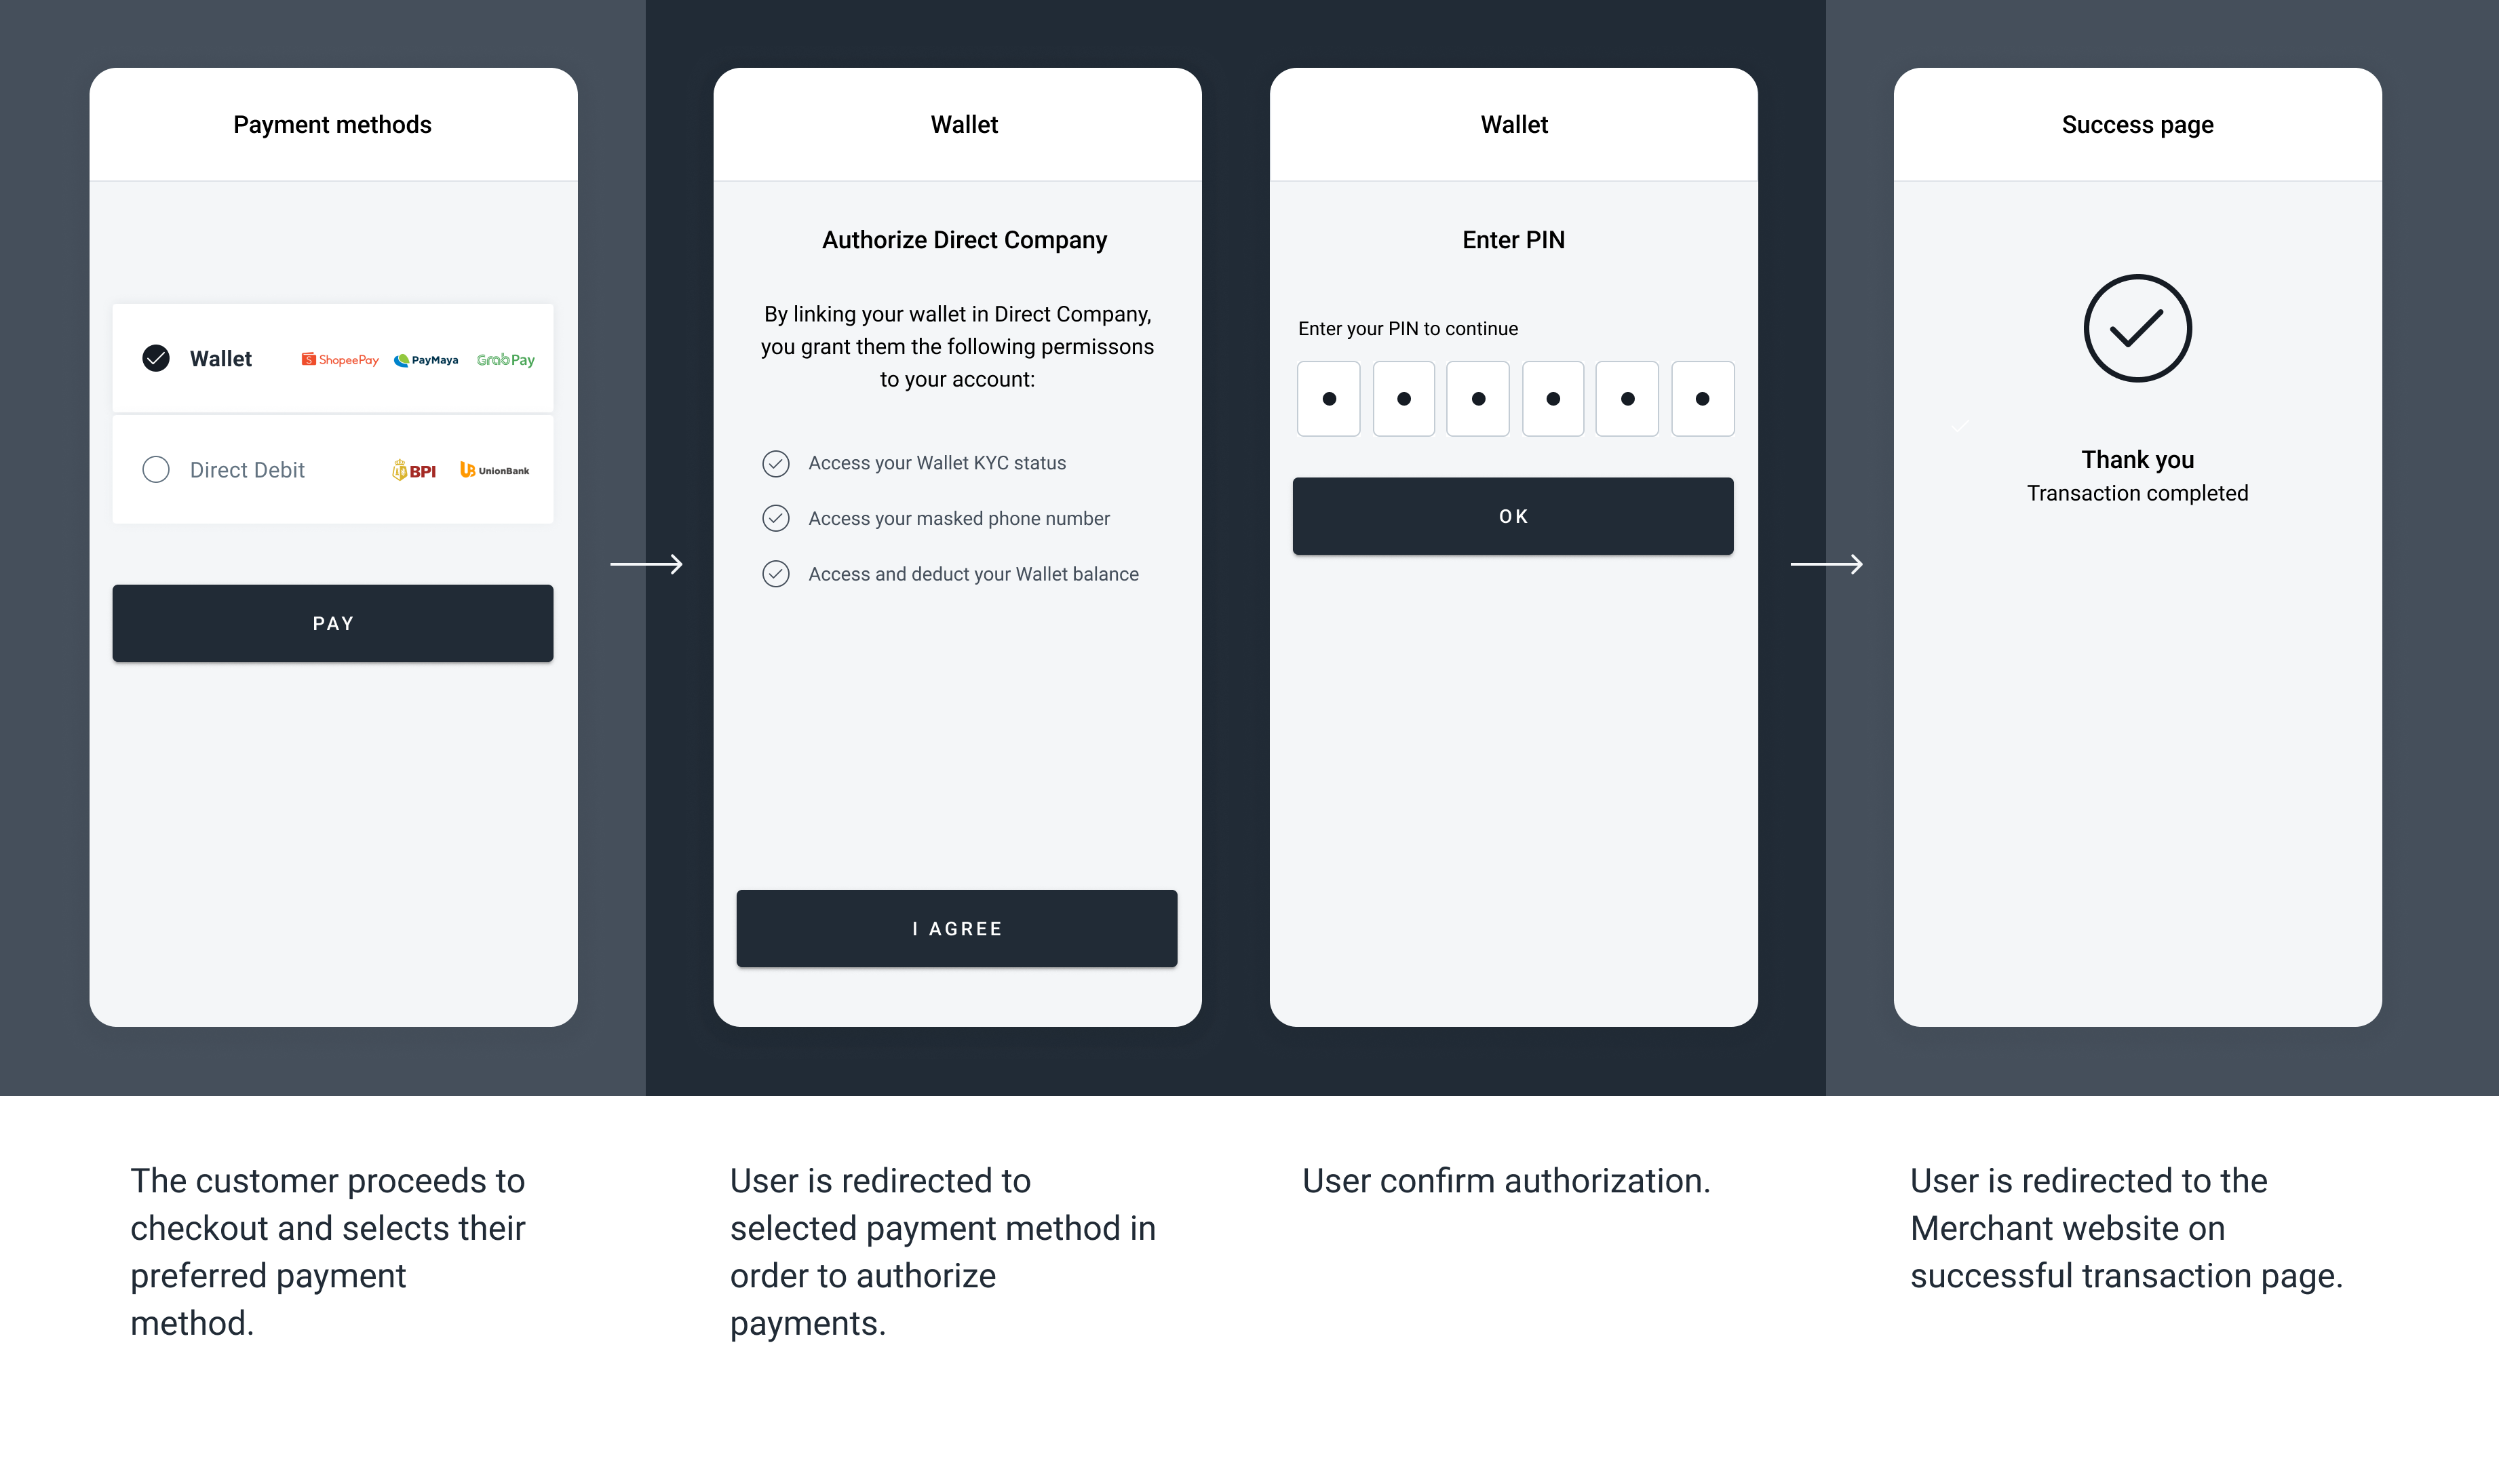 The screenshots illustrate a generic Recurring Payment redirect flow. The specifics of the flow can change depending on the payment method selected to complete the transaction.